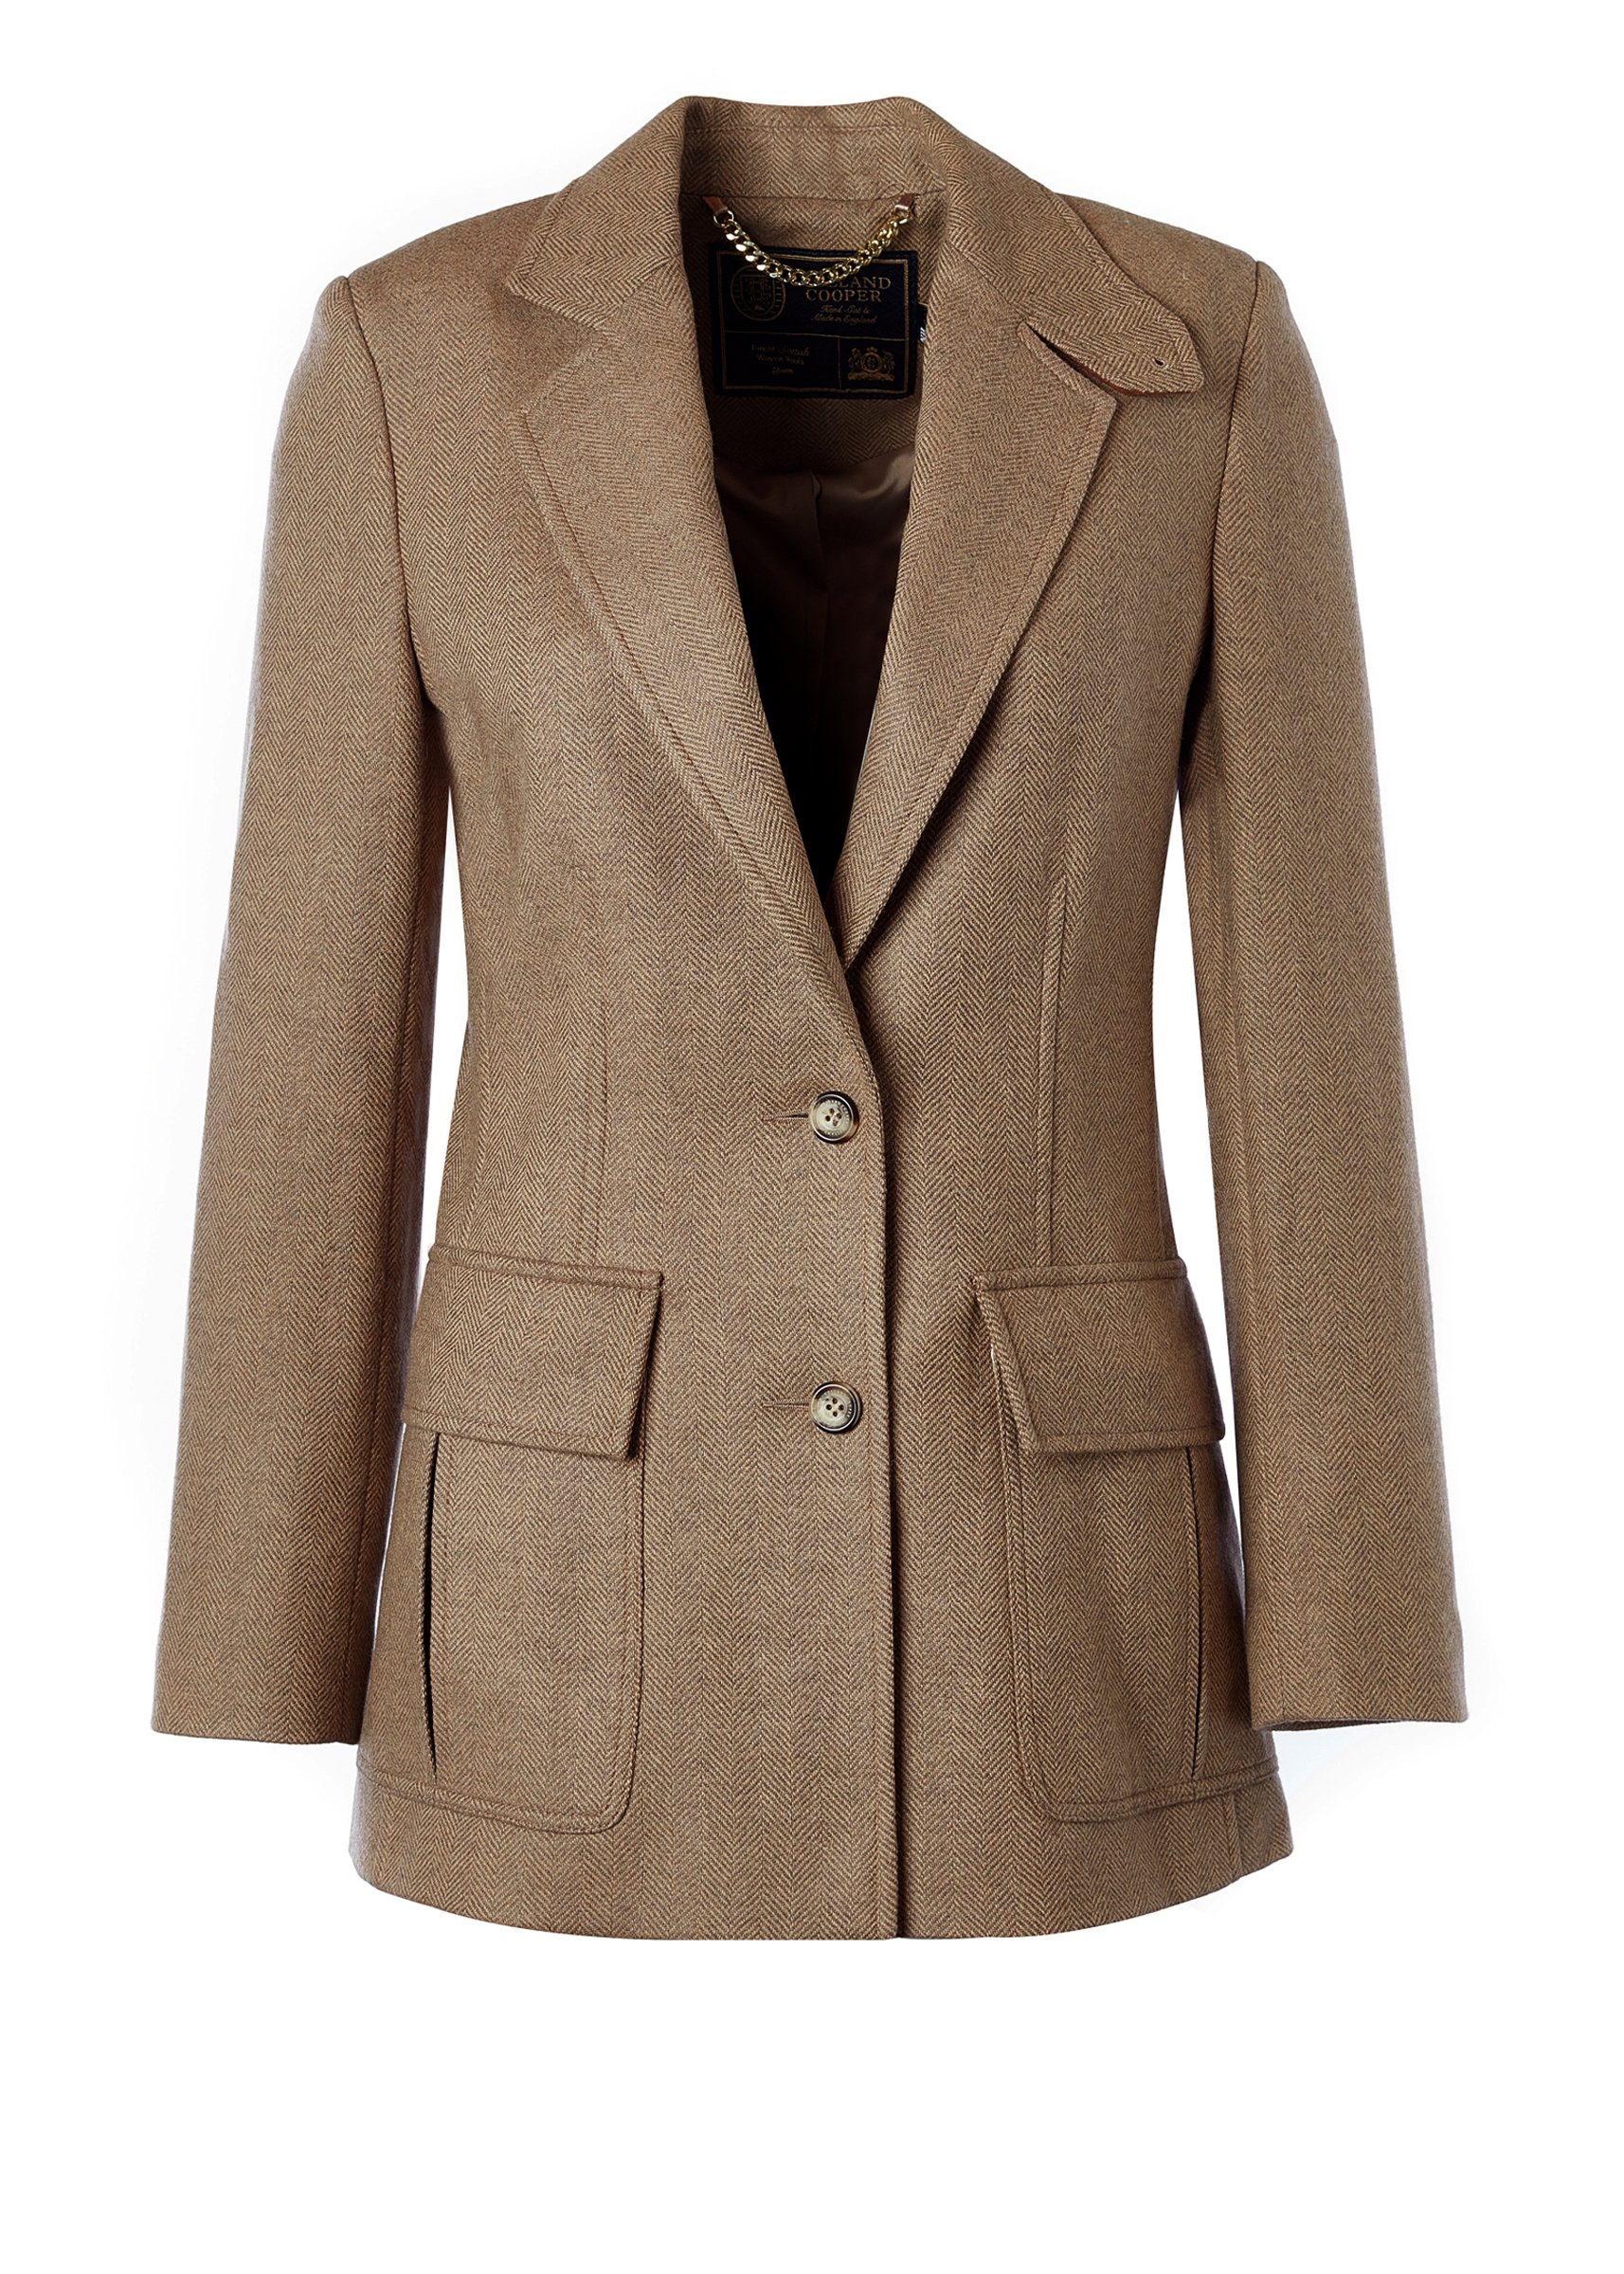 Double Breasted Blazer (Camel Houndstooth) – Holland Cooper ®